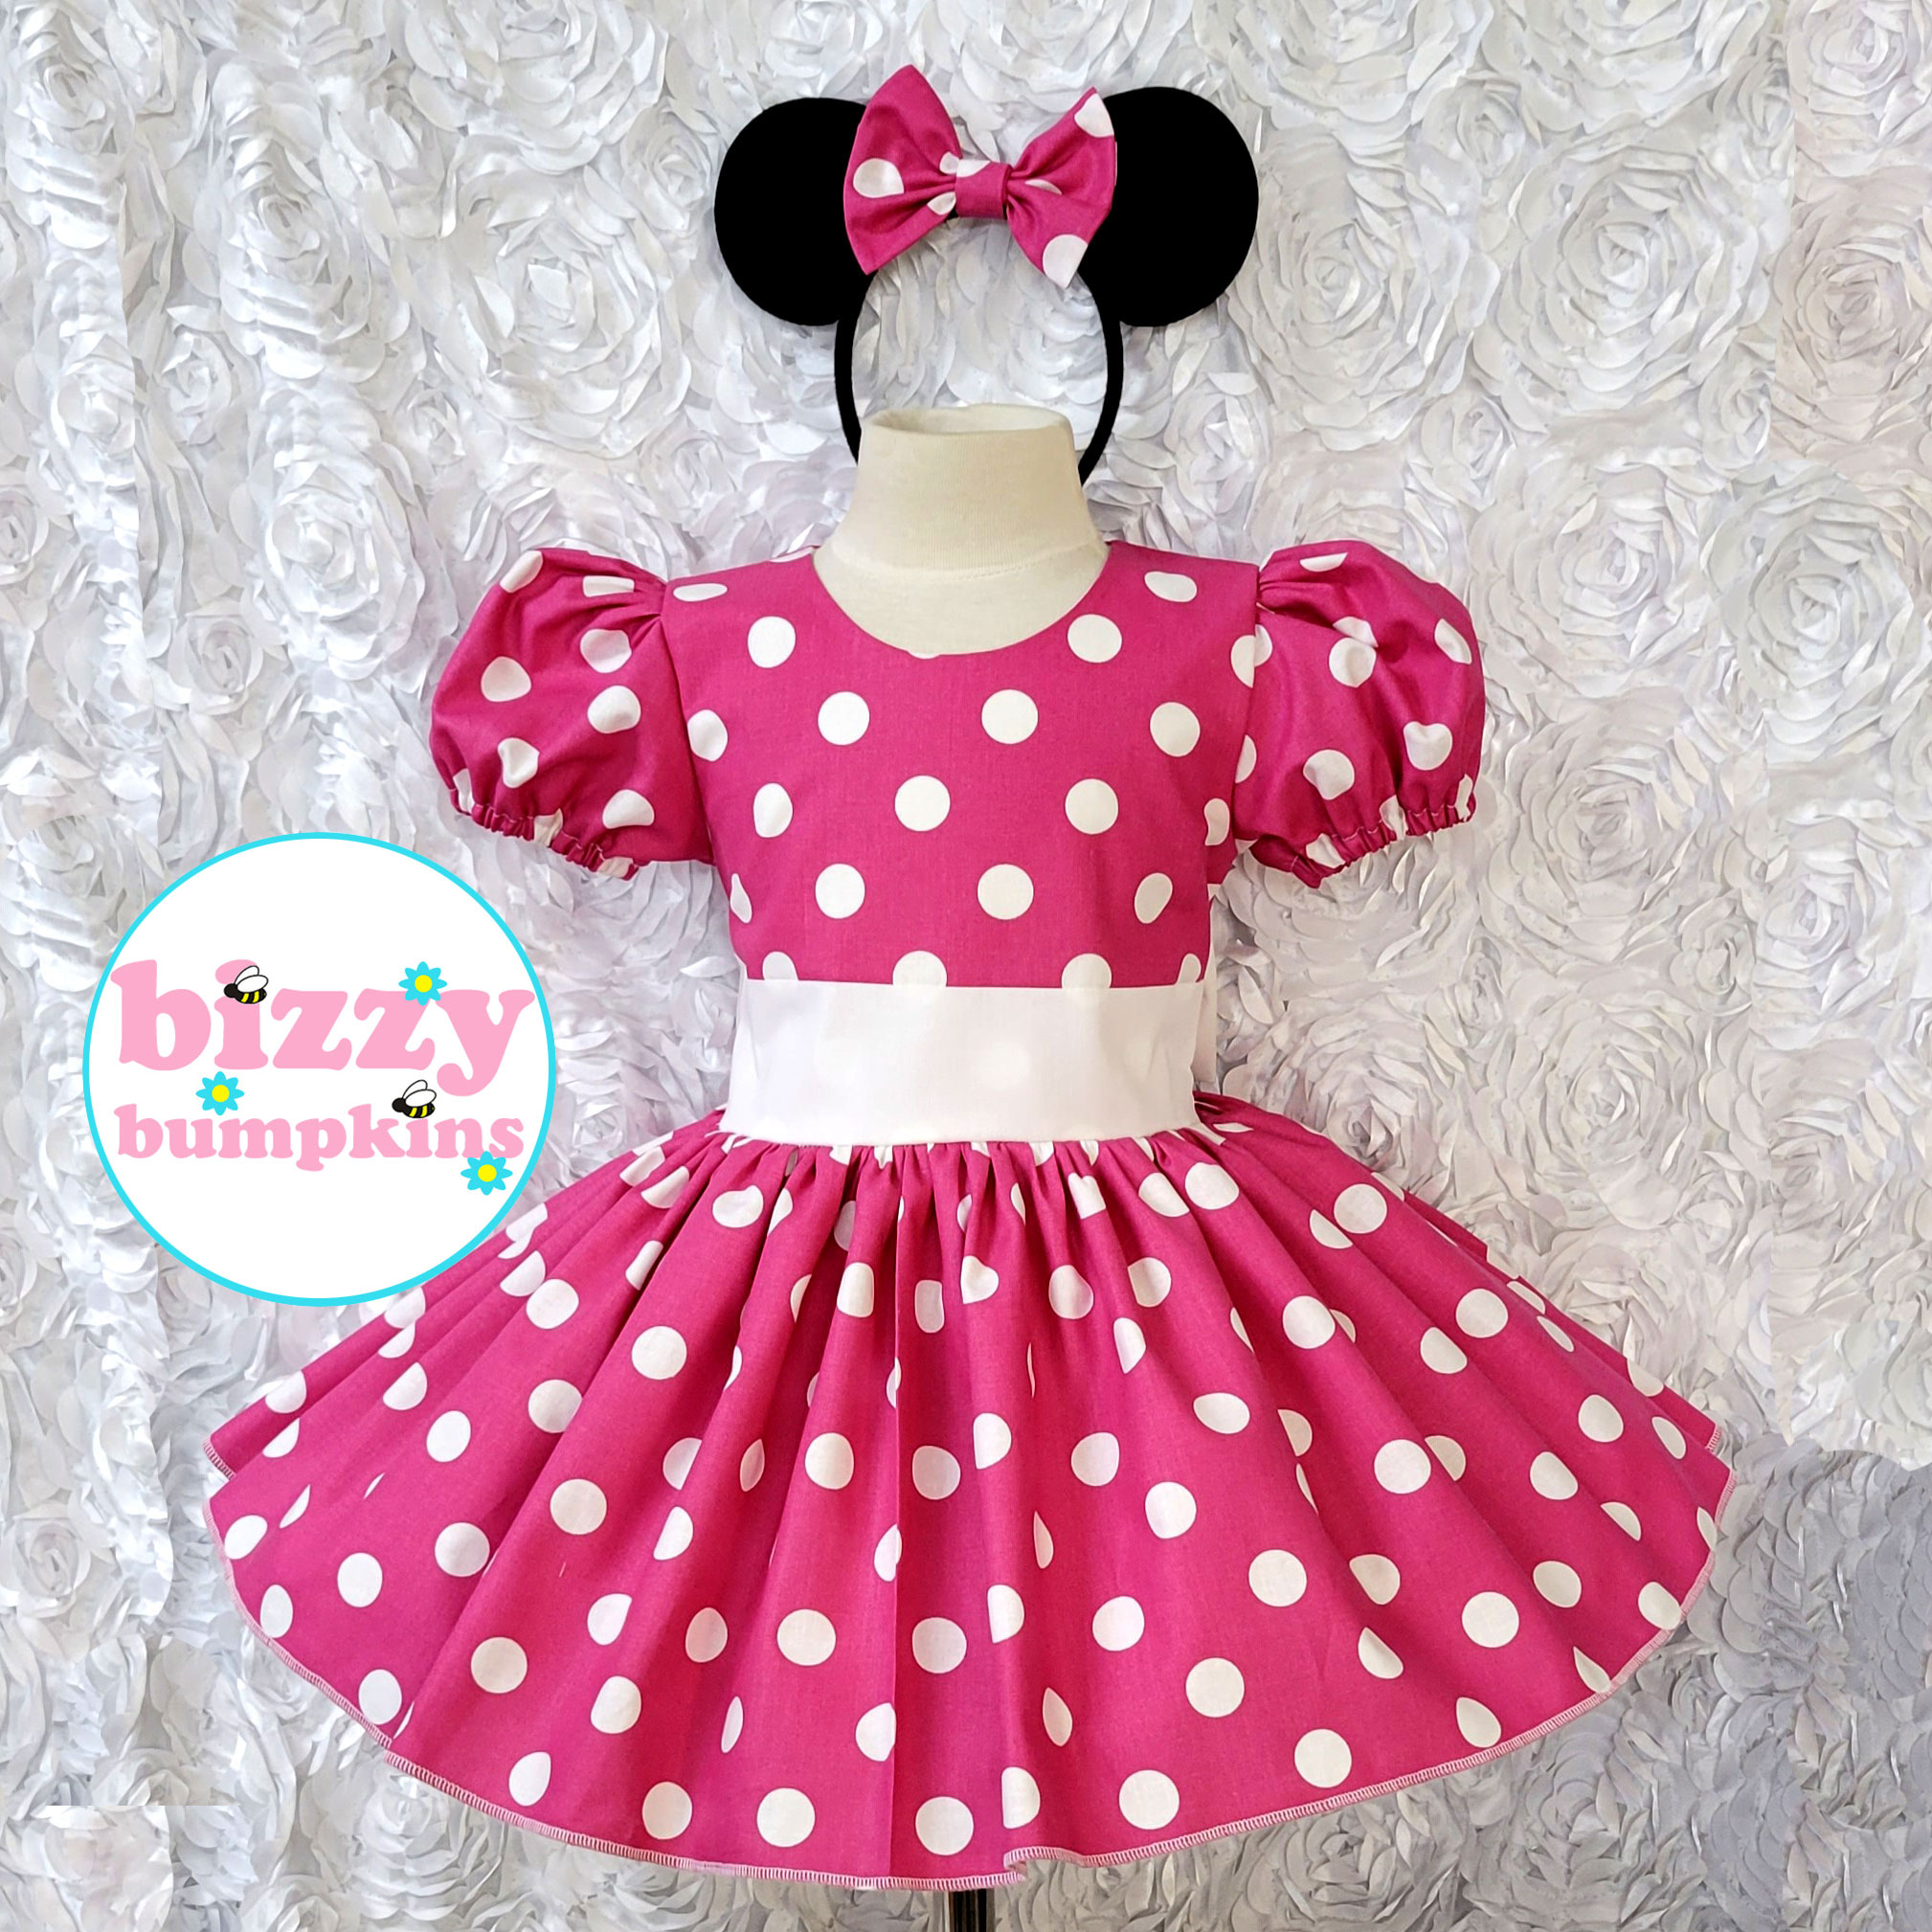 Minnie Mouse Infant & Toddler Costumes 2T Size for sale